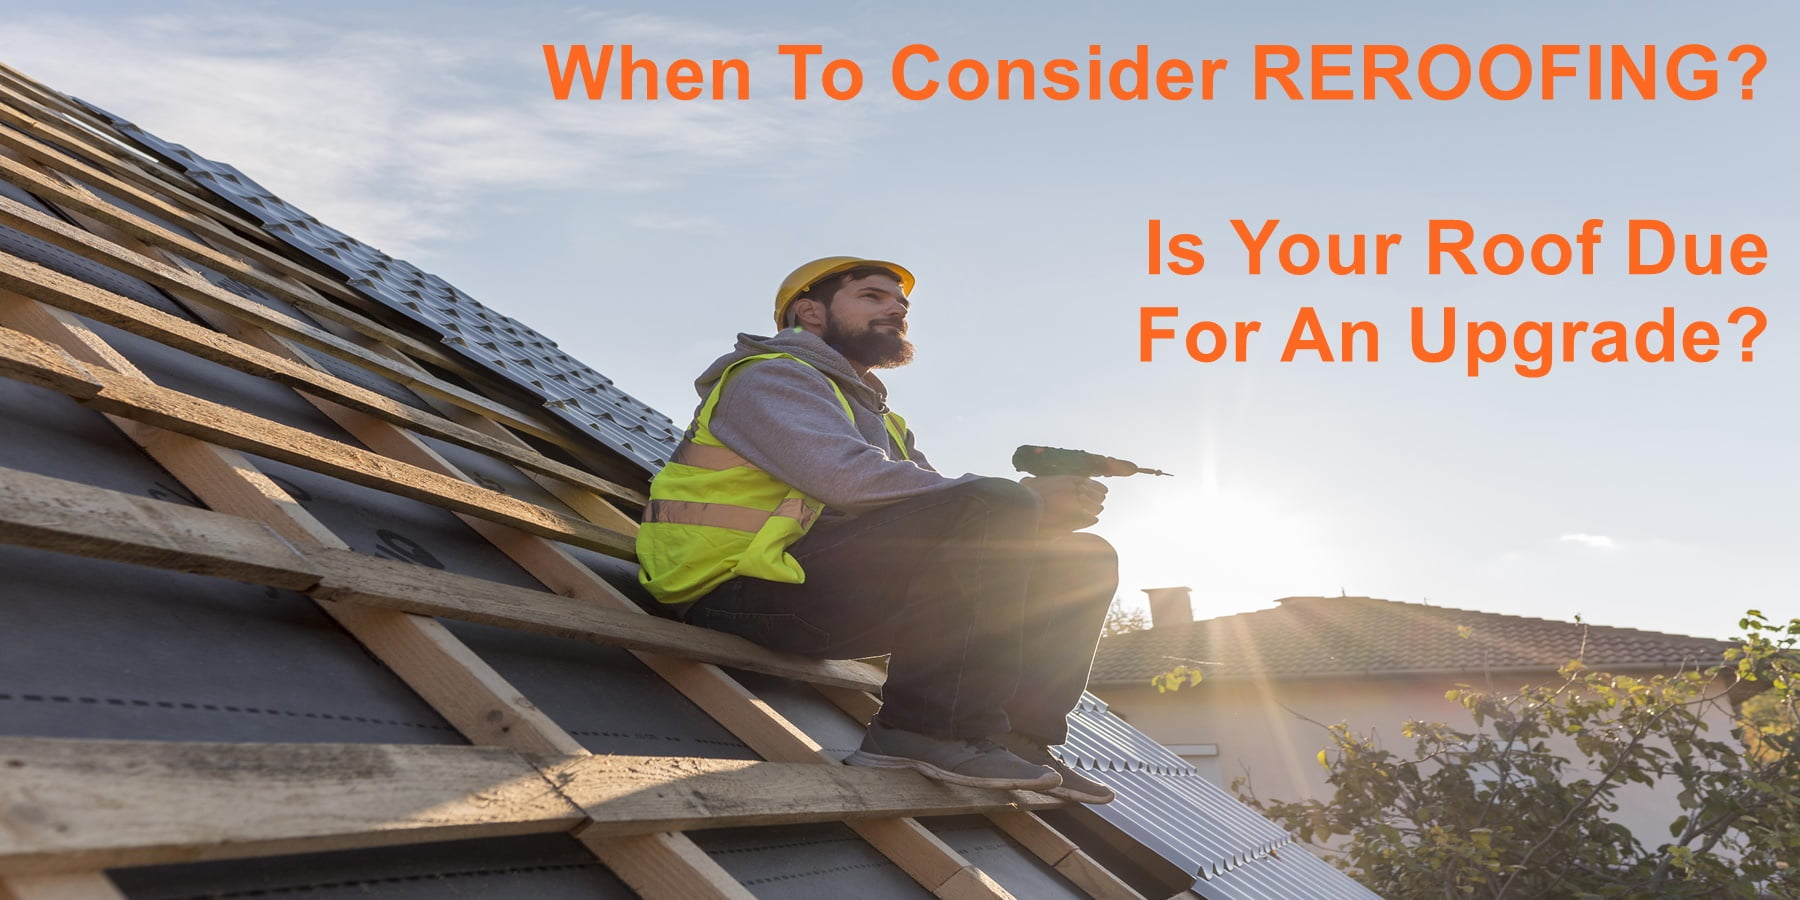 When To Consider Reroofing: Is Your Roof Due For An Upgrade?